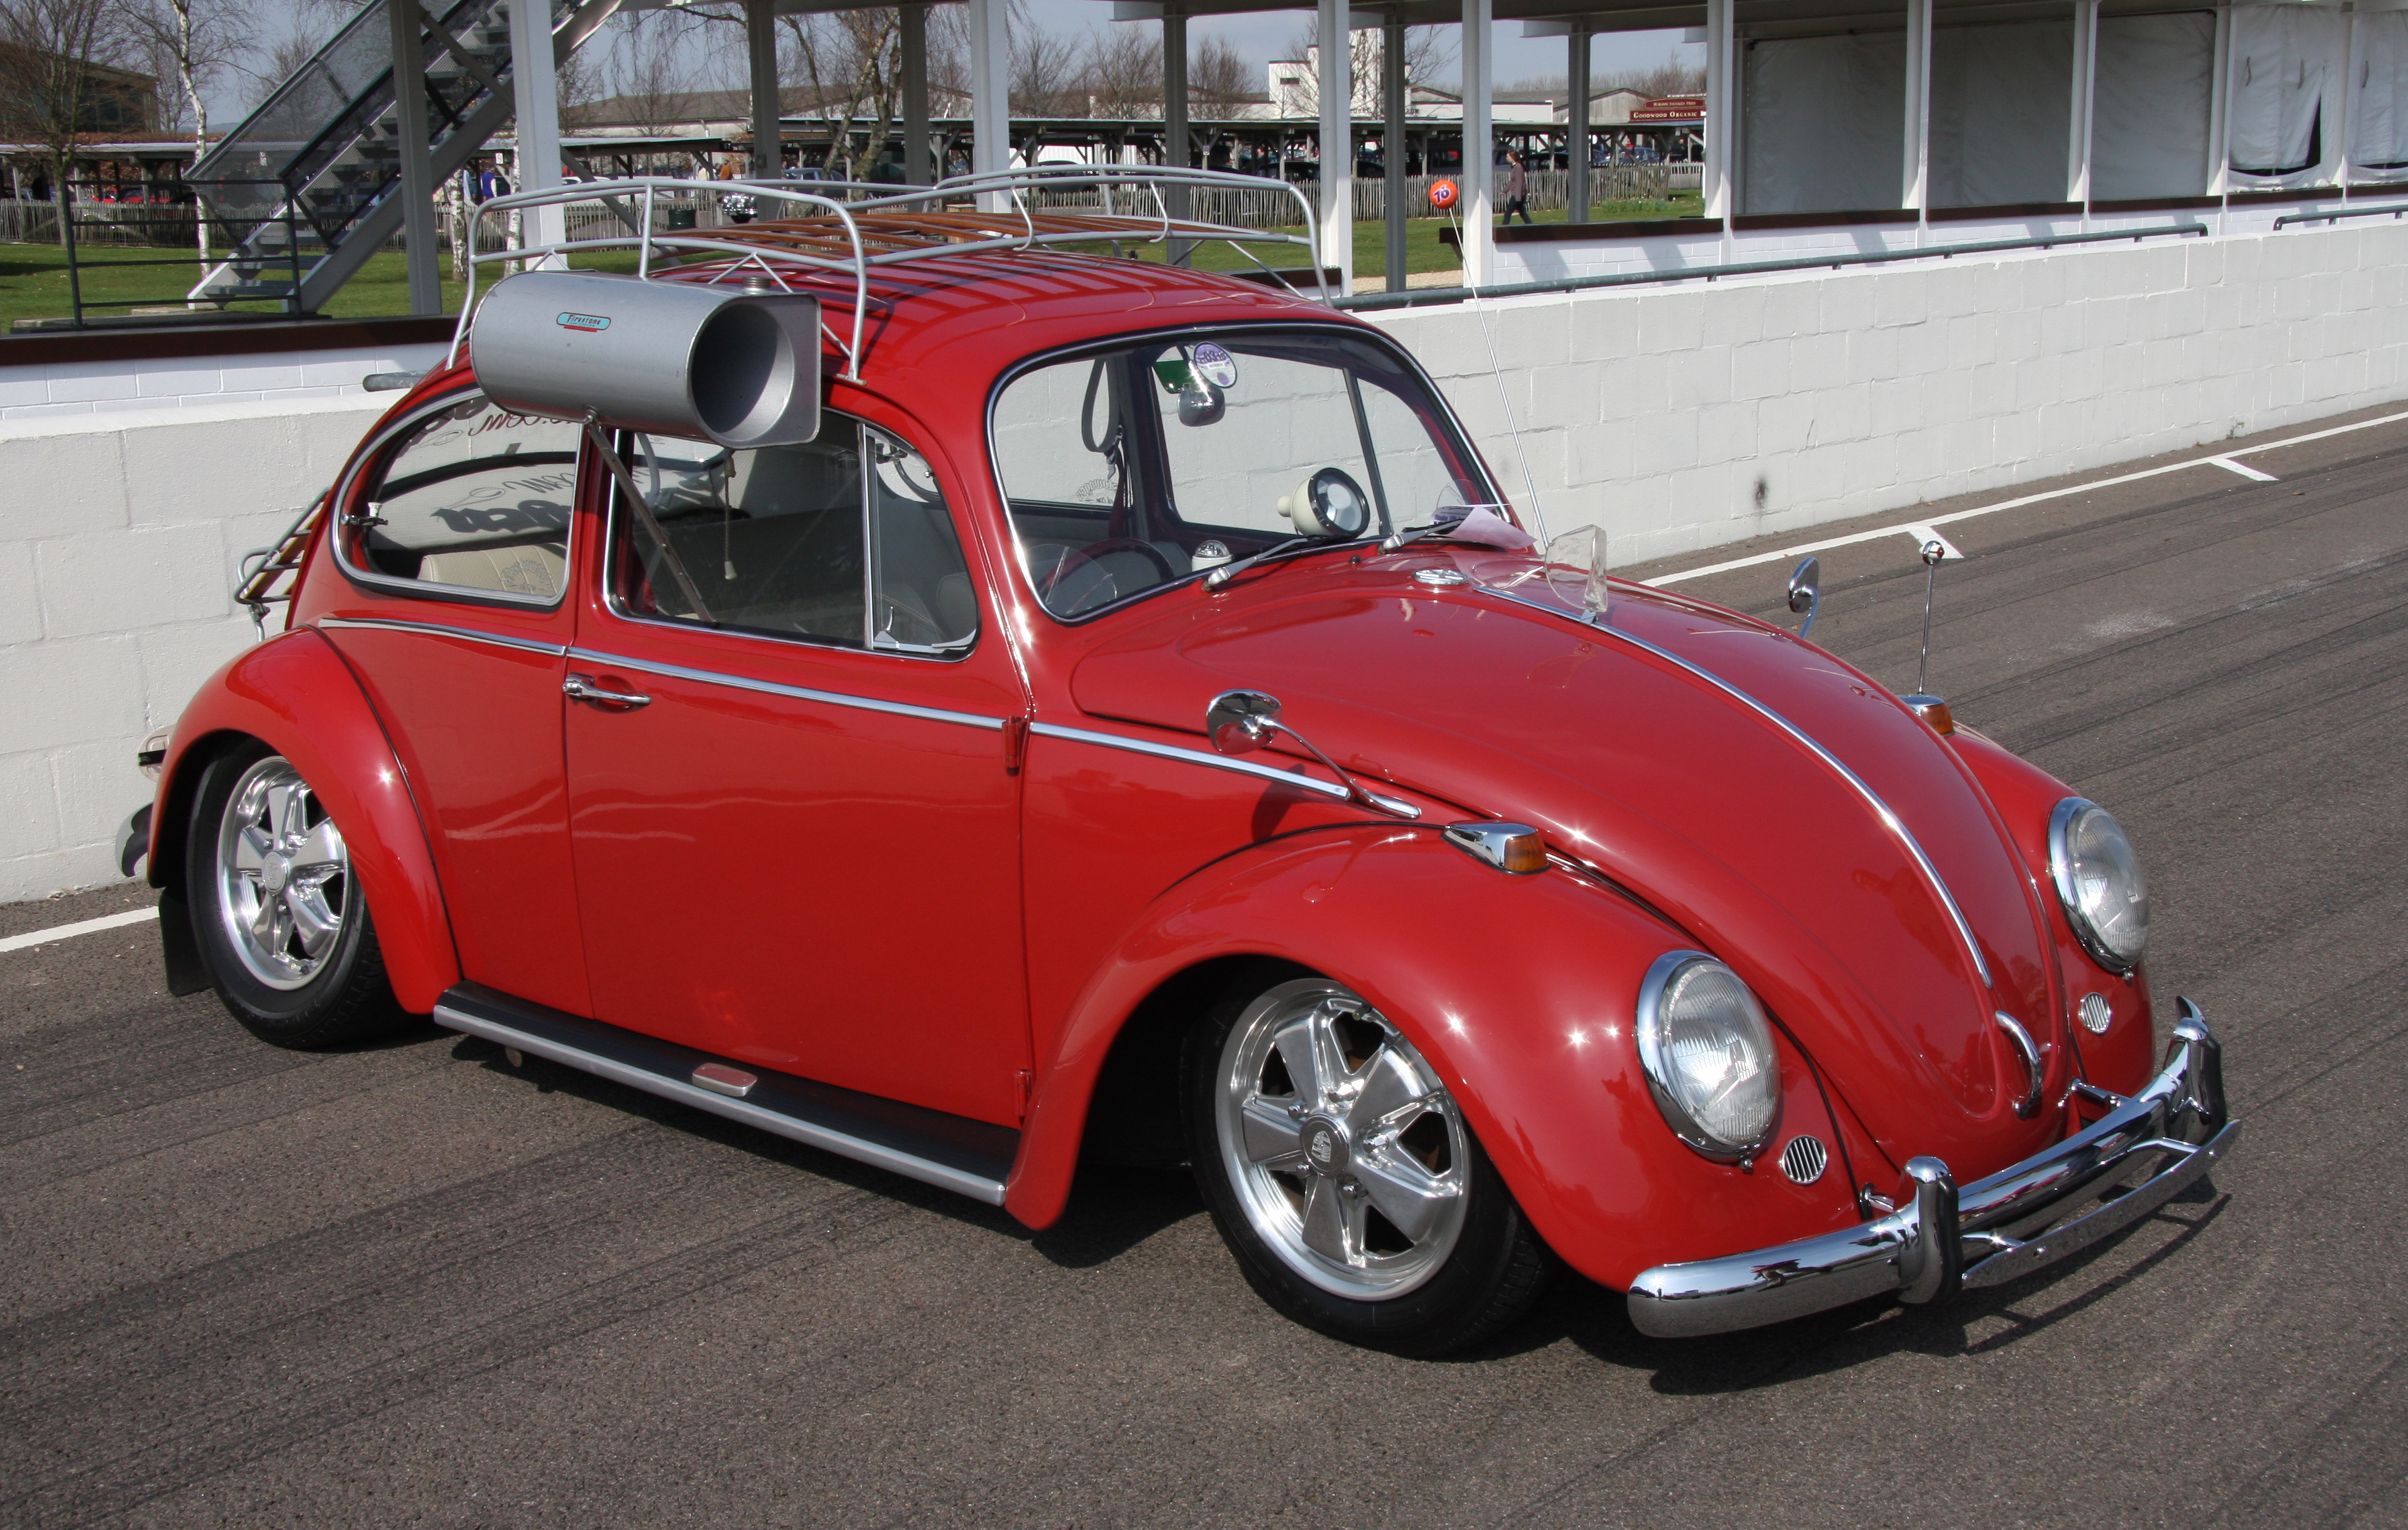 File:'Air conditioned' VW Beetle - Flickr - exfordy.jpg - Wikimedia ...